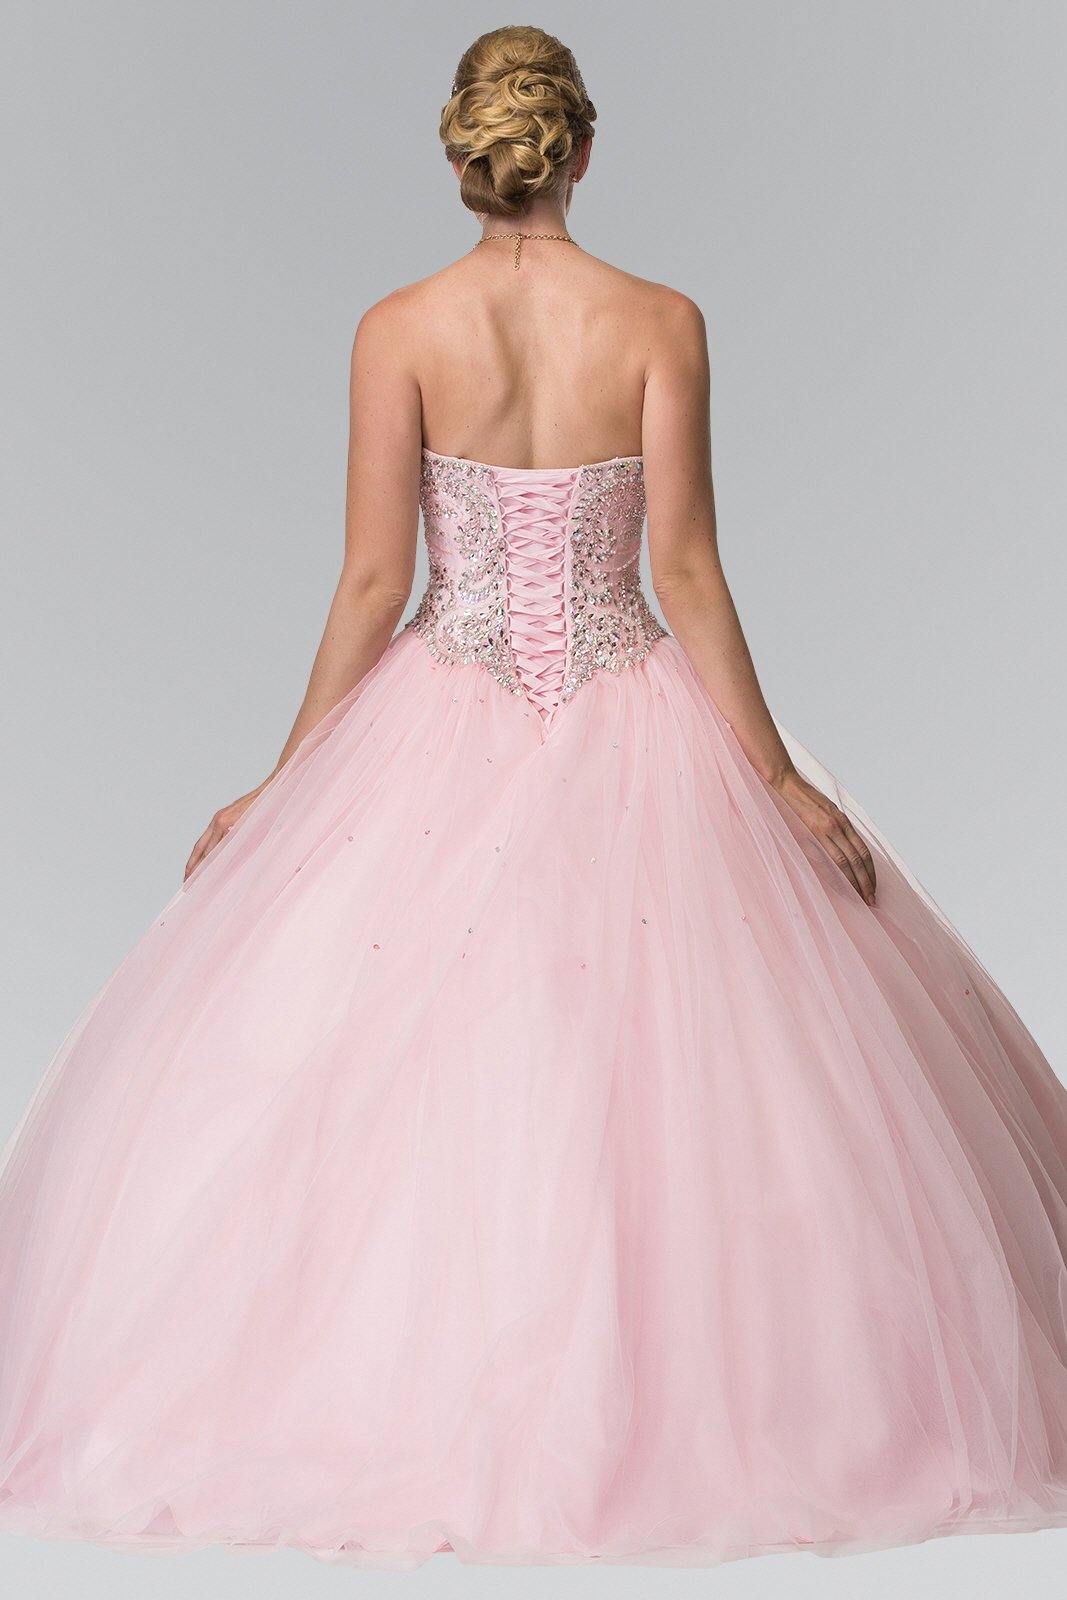 Long Quinceanera Dress Beaded Details with Matching Bolero - The Dress Outlet Elizabeth K